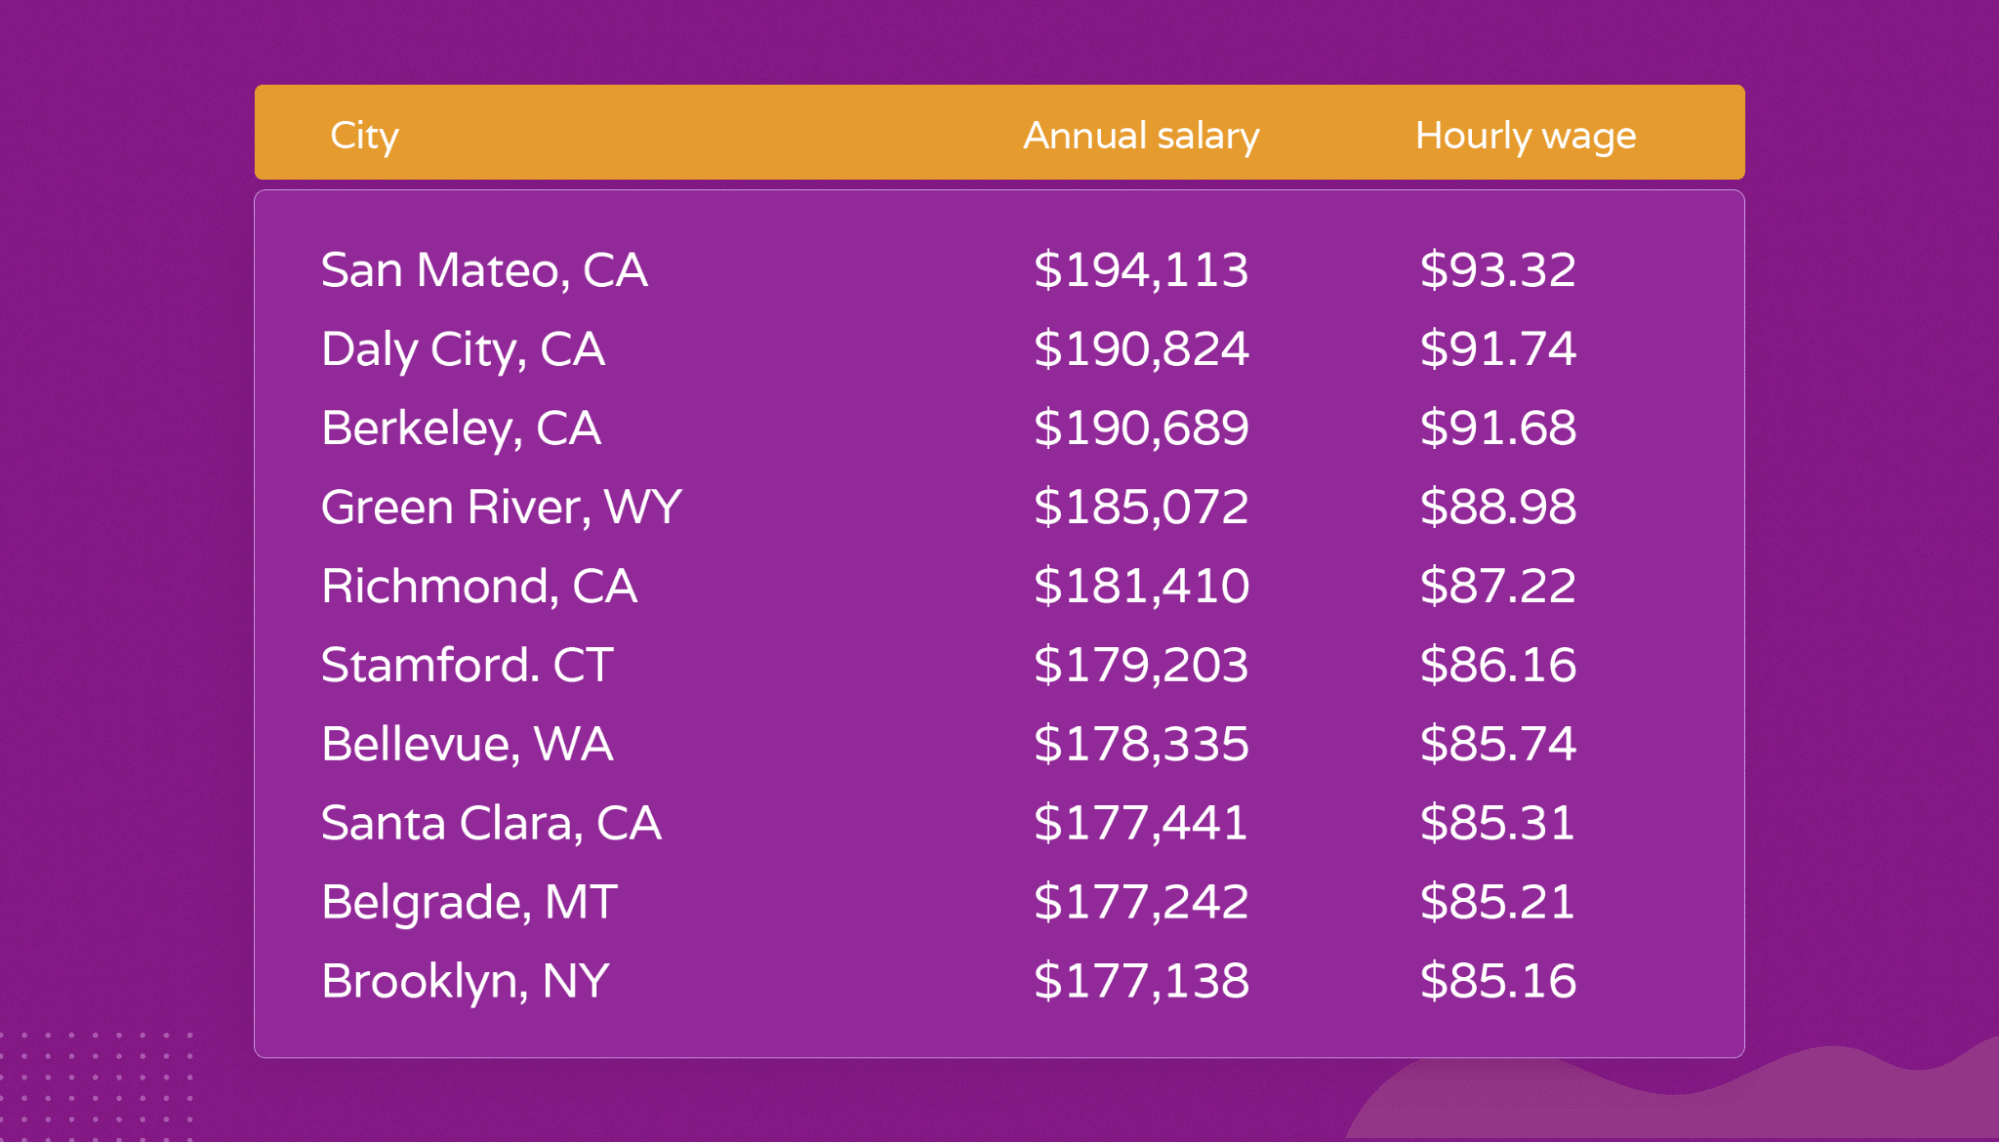 Dermatologist assistant salary by city